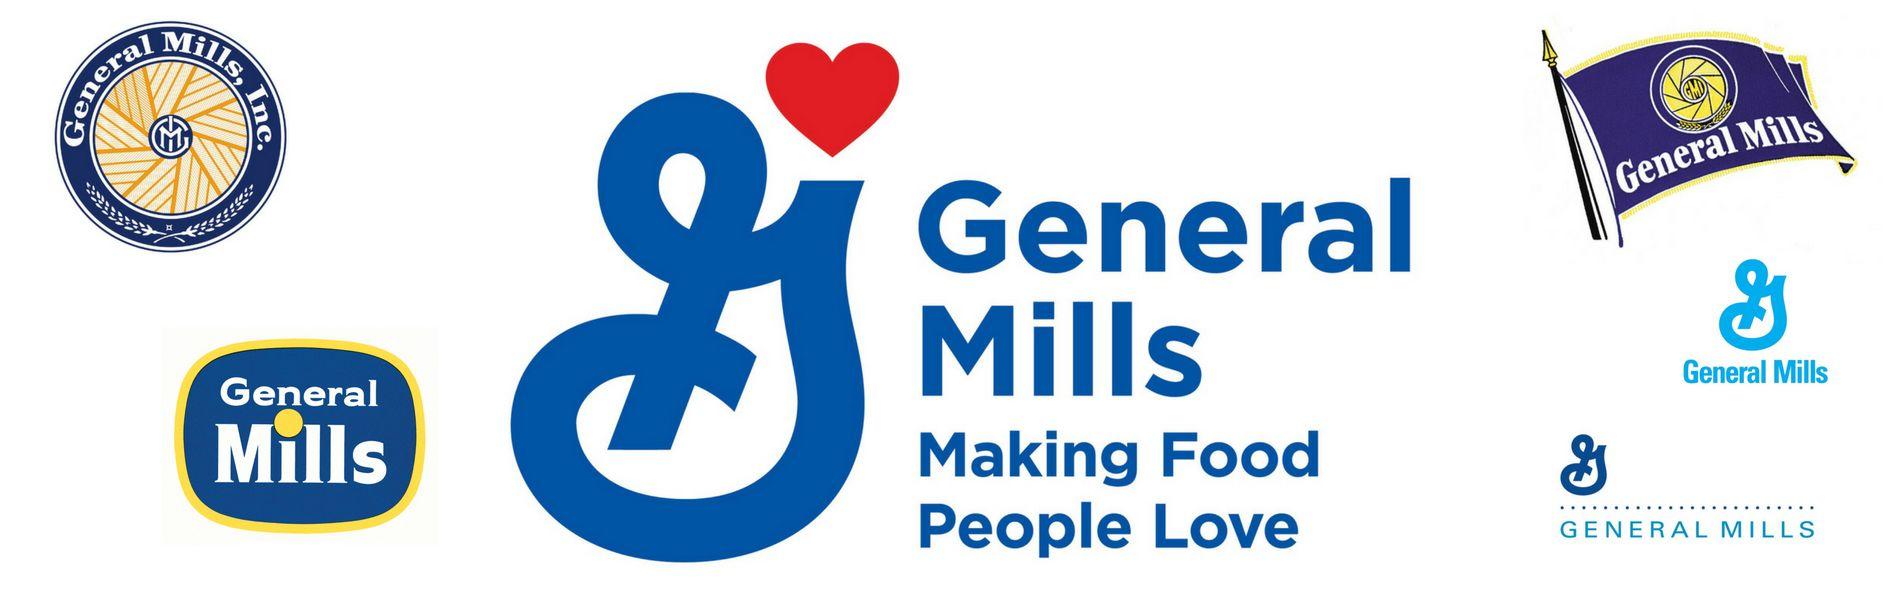 General Mills Logo - People at the heart of new General Mills logo